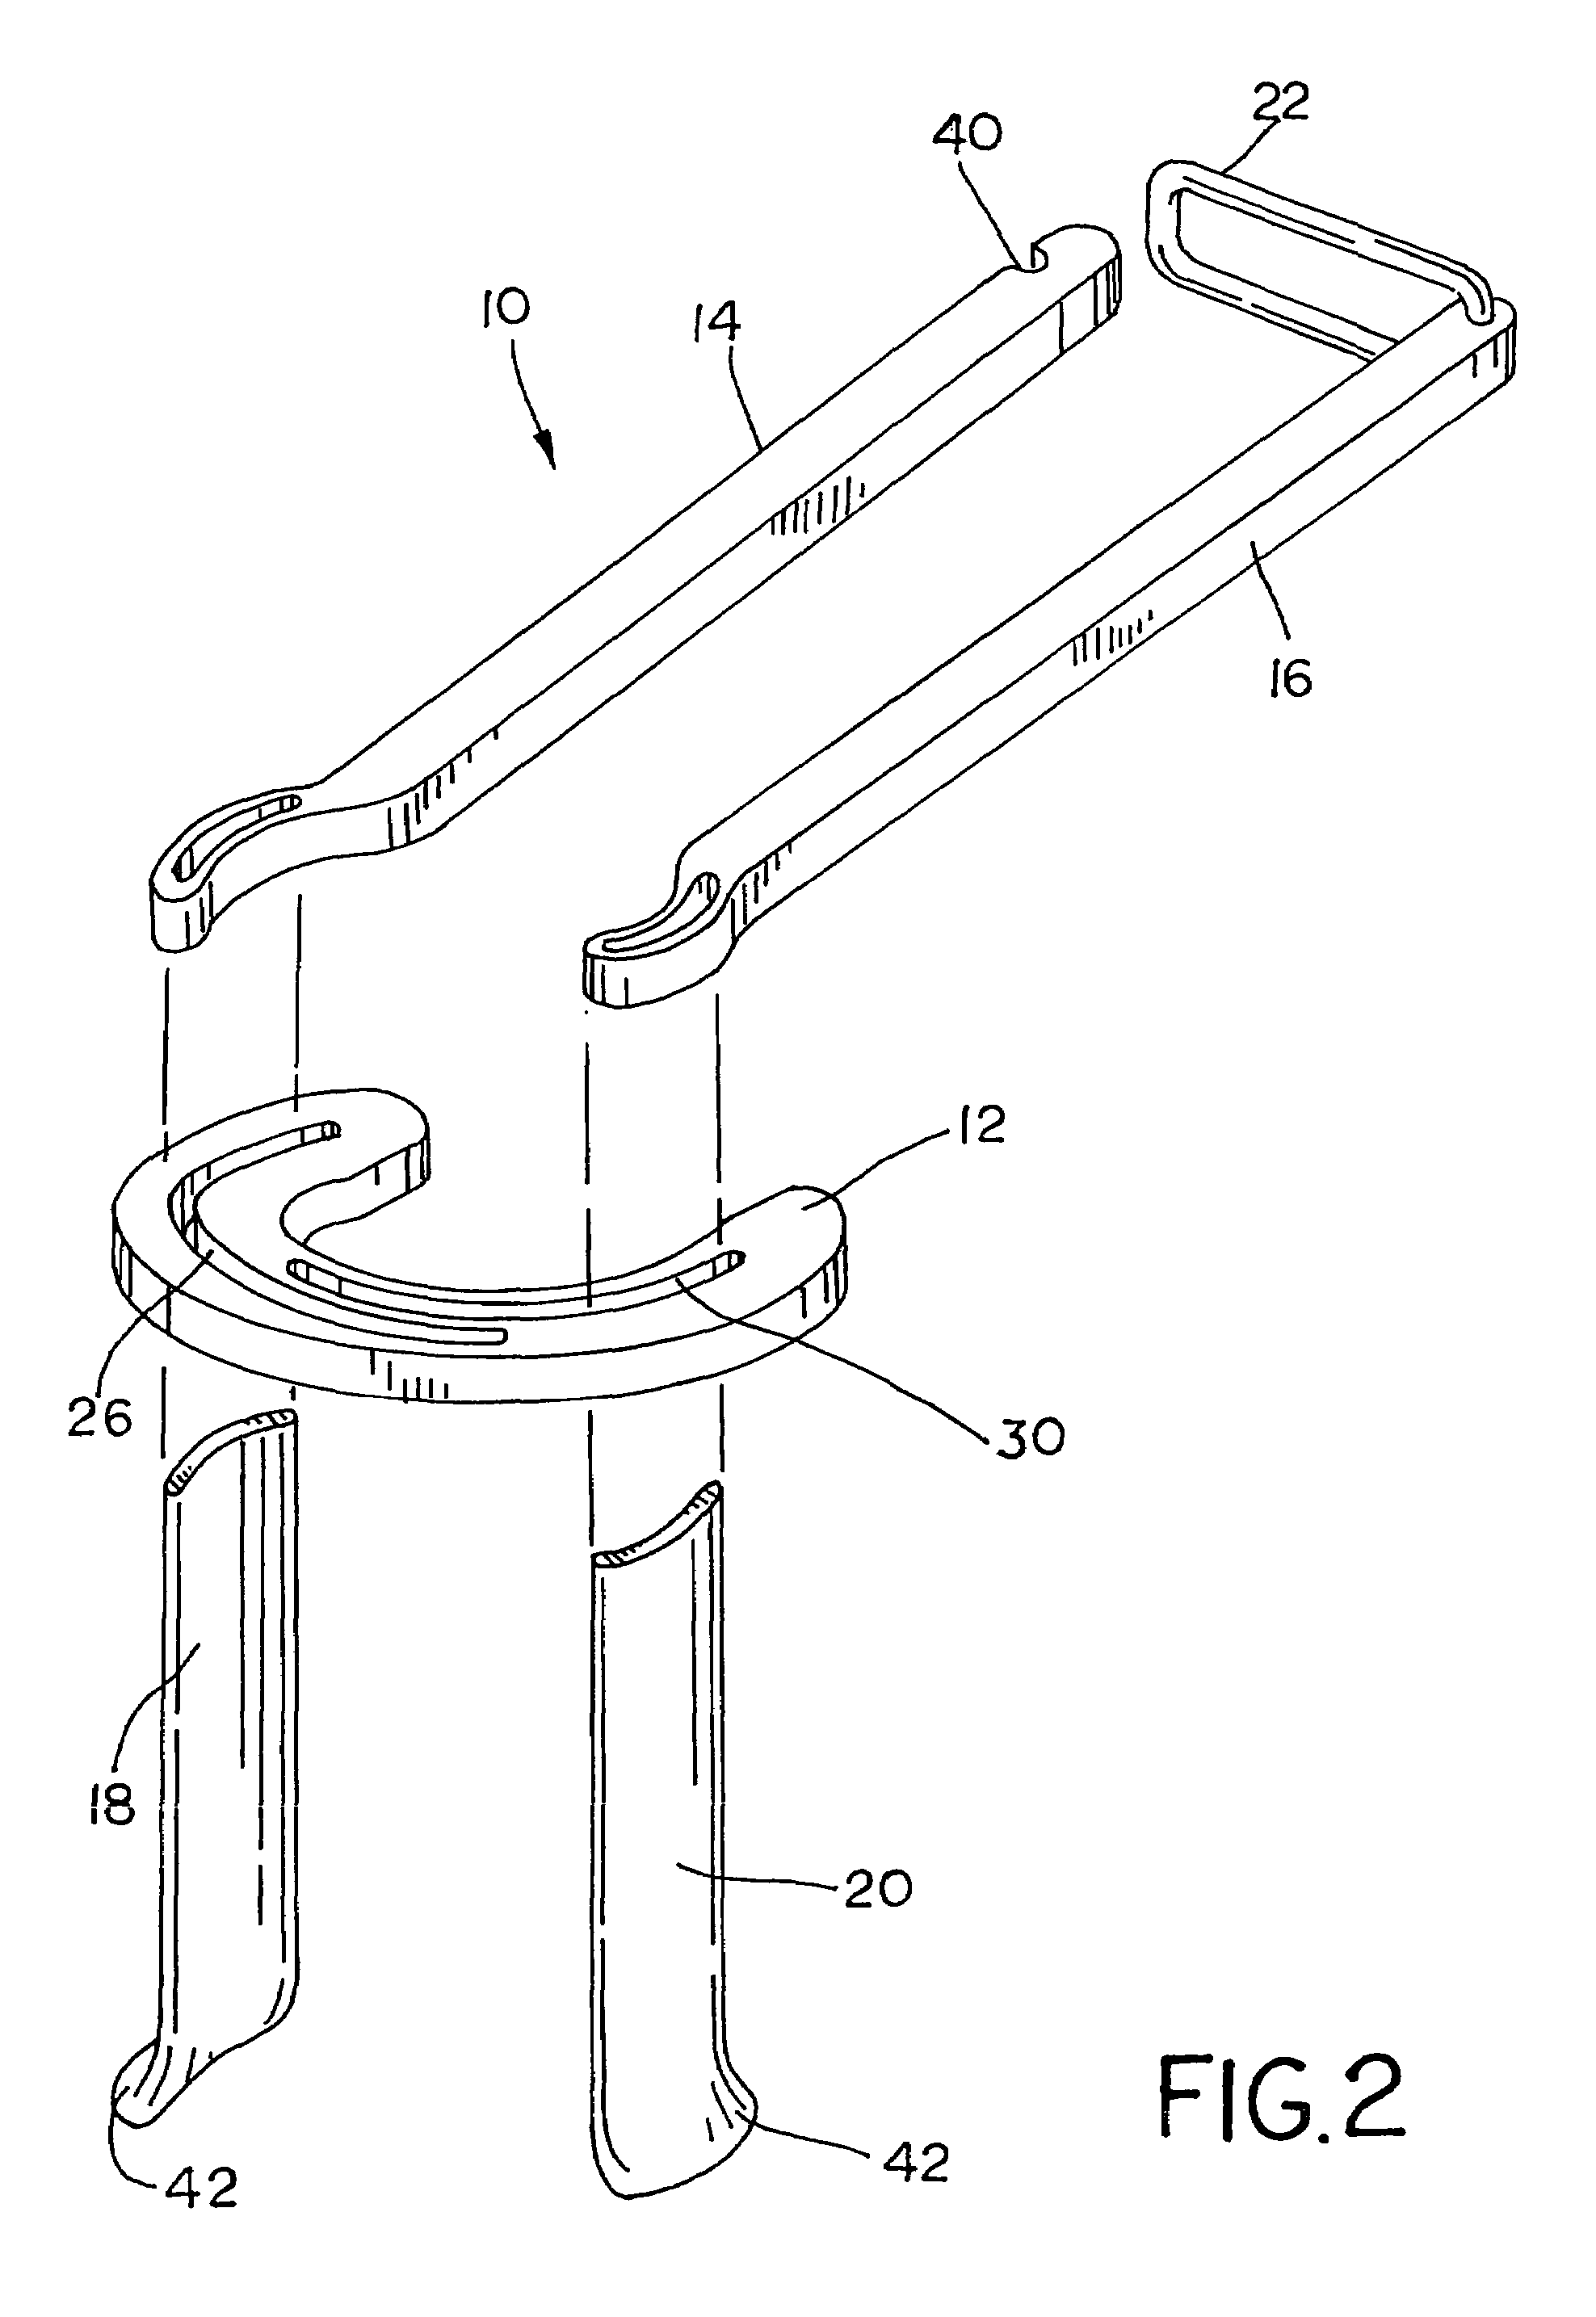 Radially expanding surgical retractor